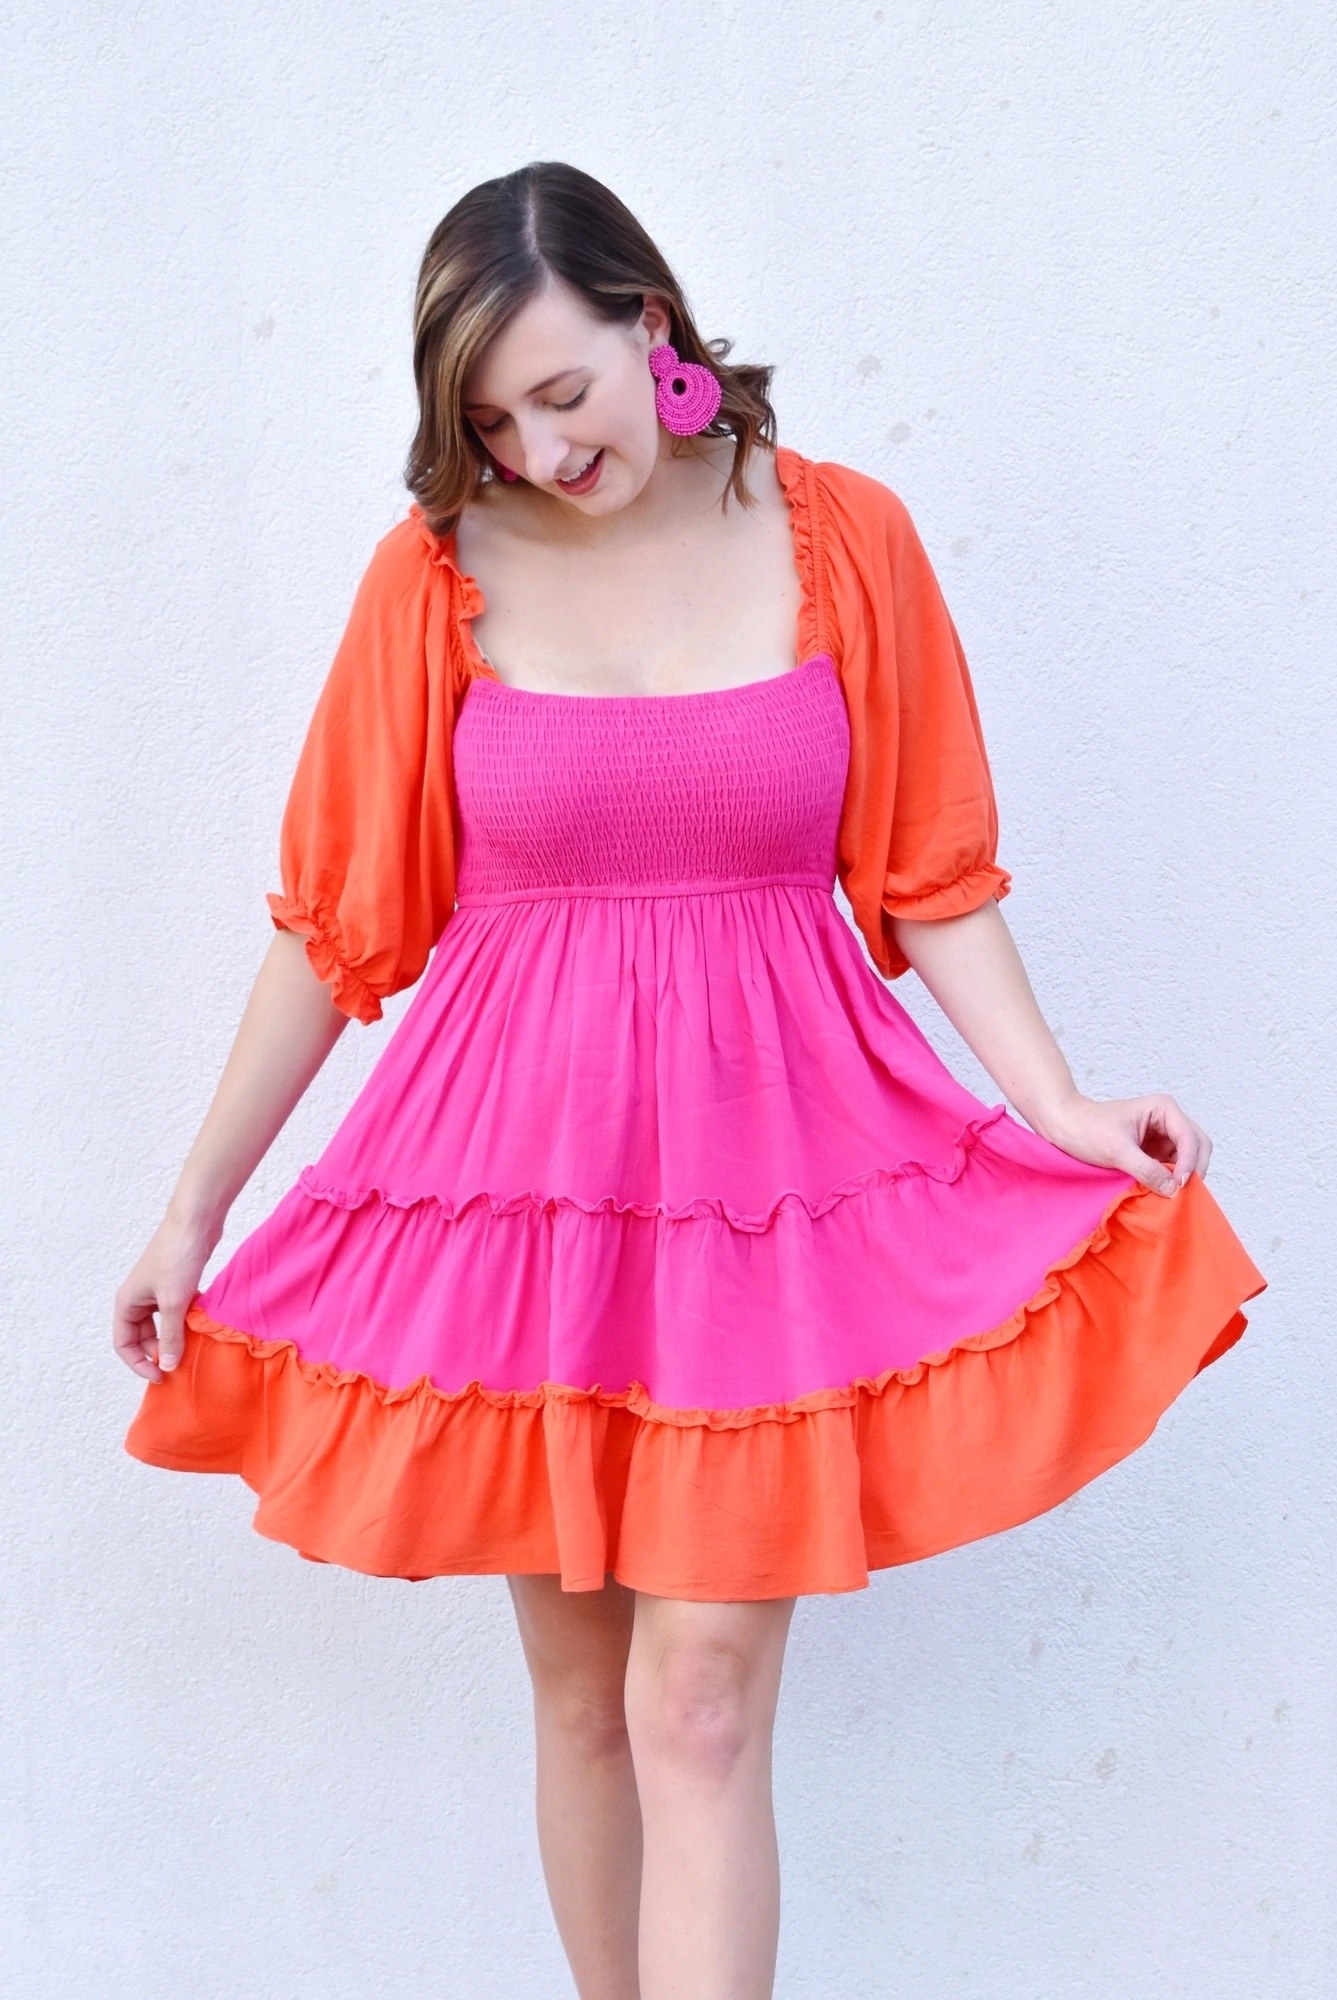 a model wearing the orange and pink dress